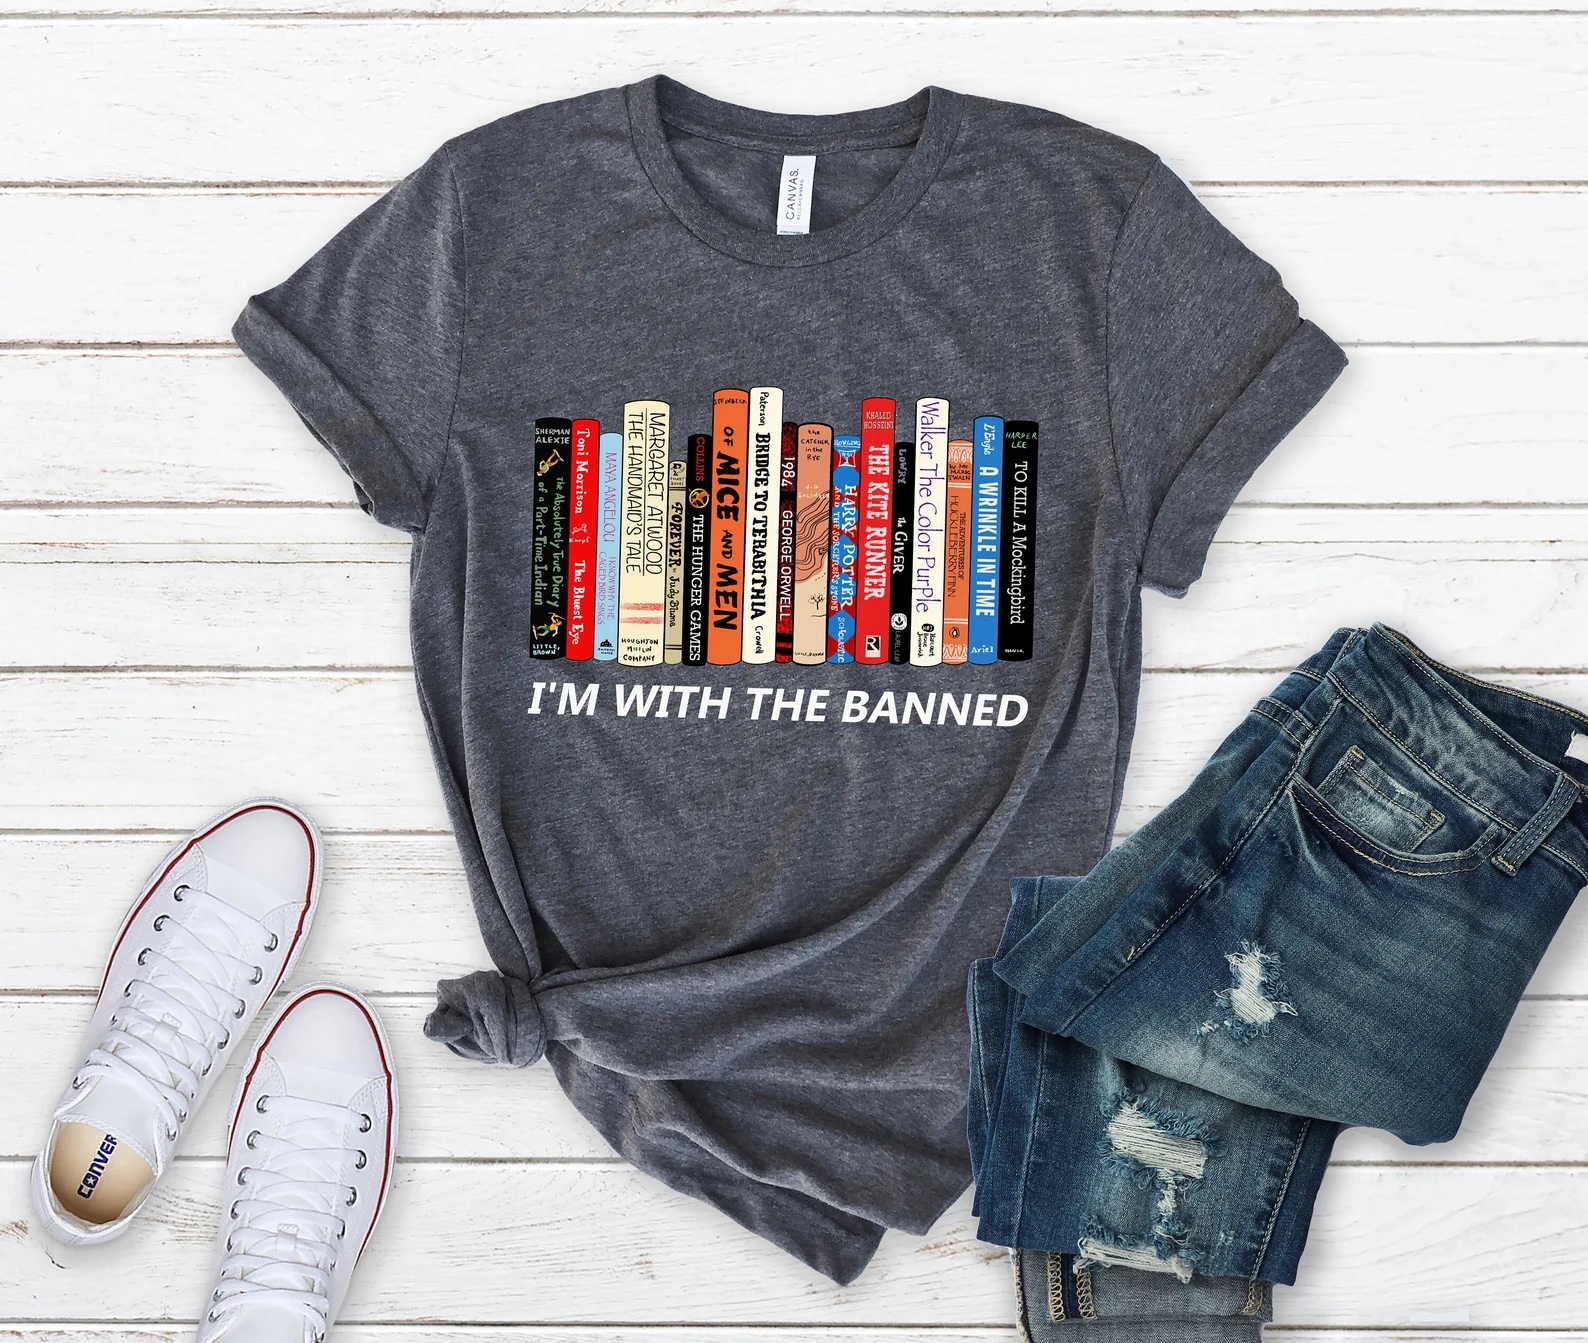 a photo of a t-shirt with a row of books on it that says "I'm with the banned."